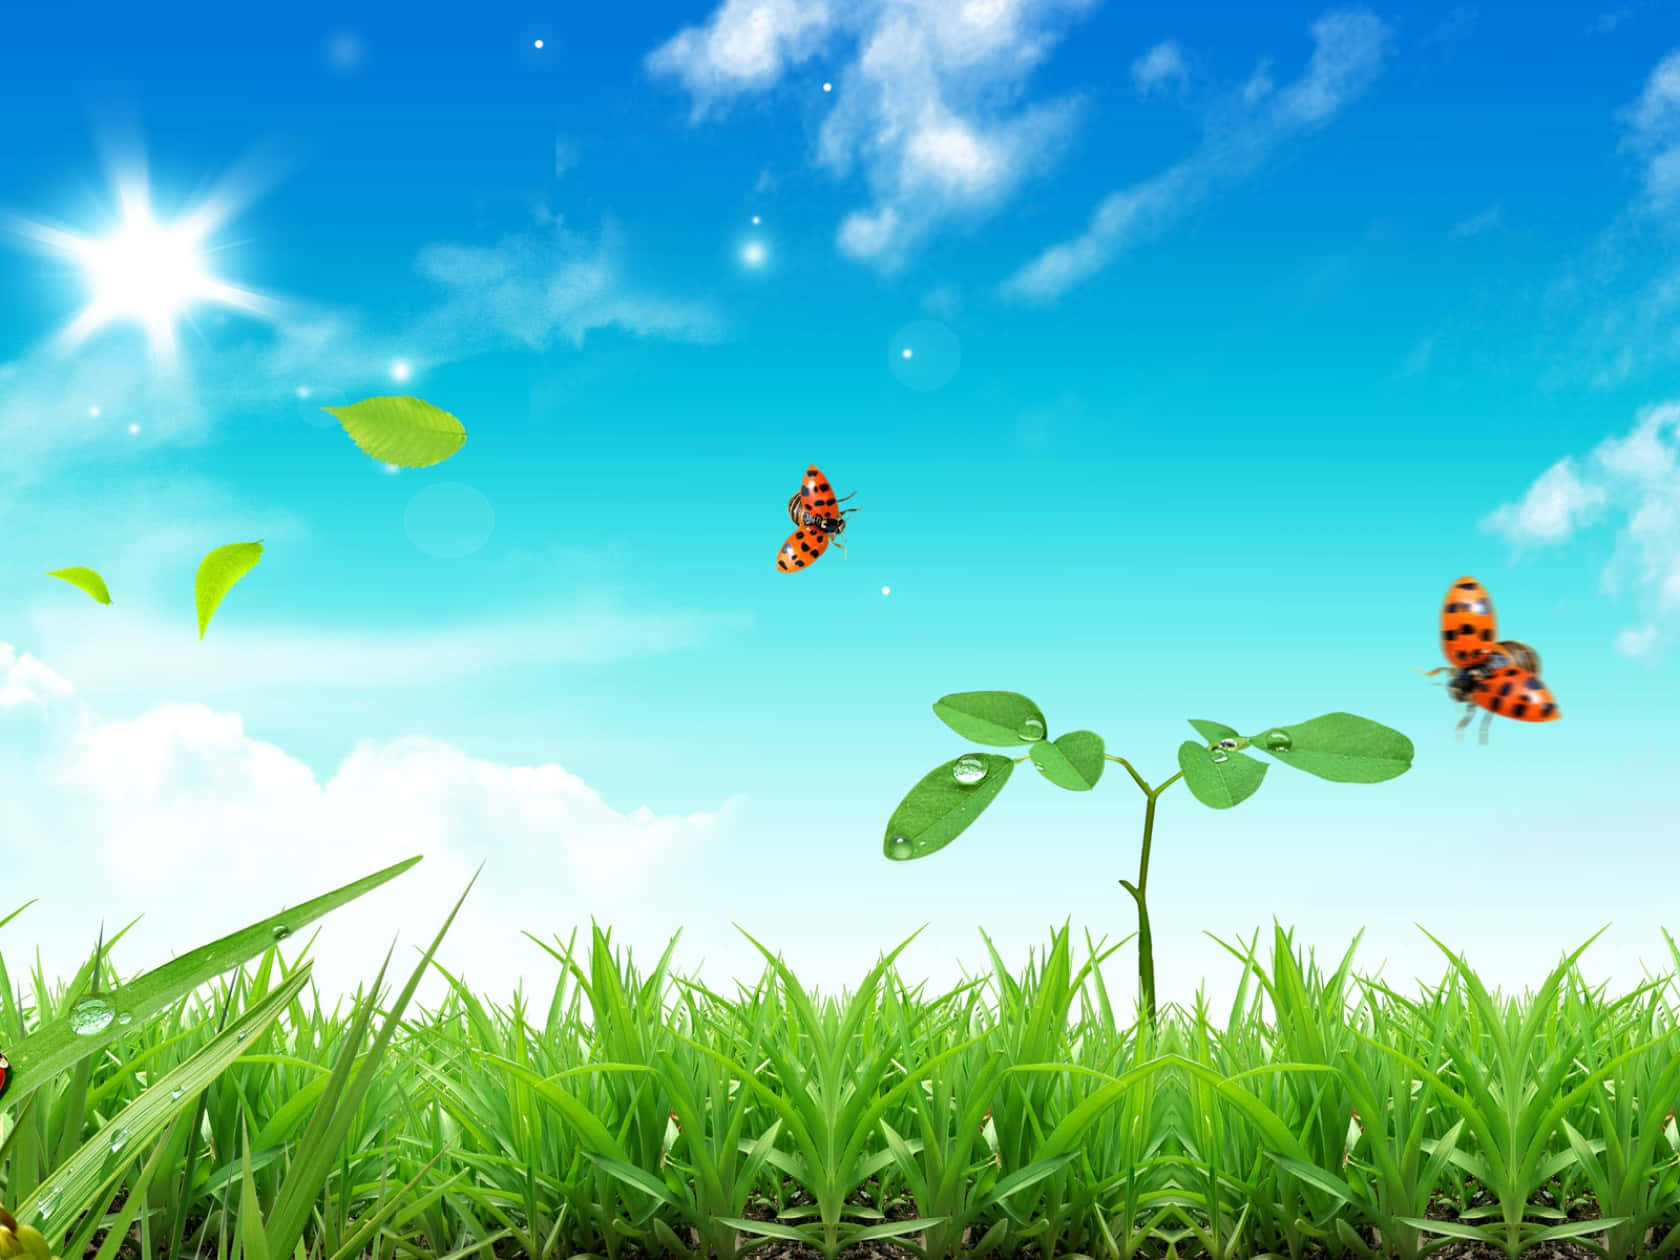 A Grassy Field With Butterflies Flying Around